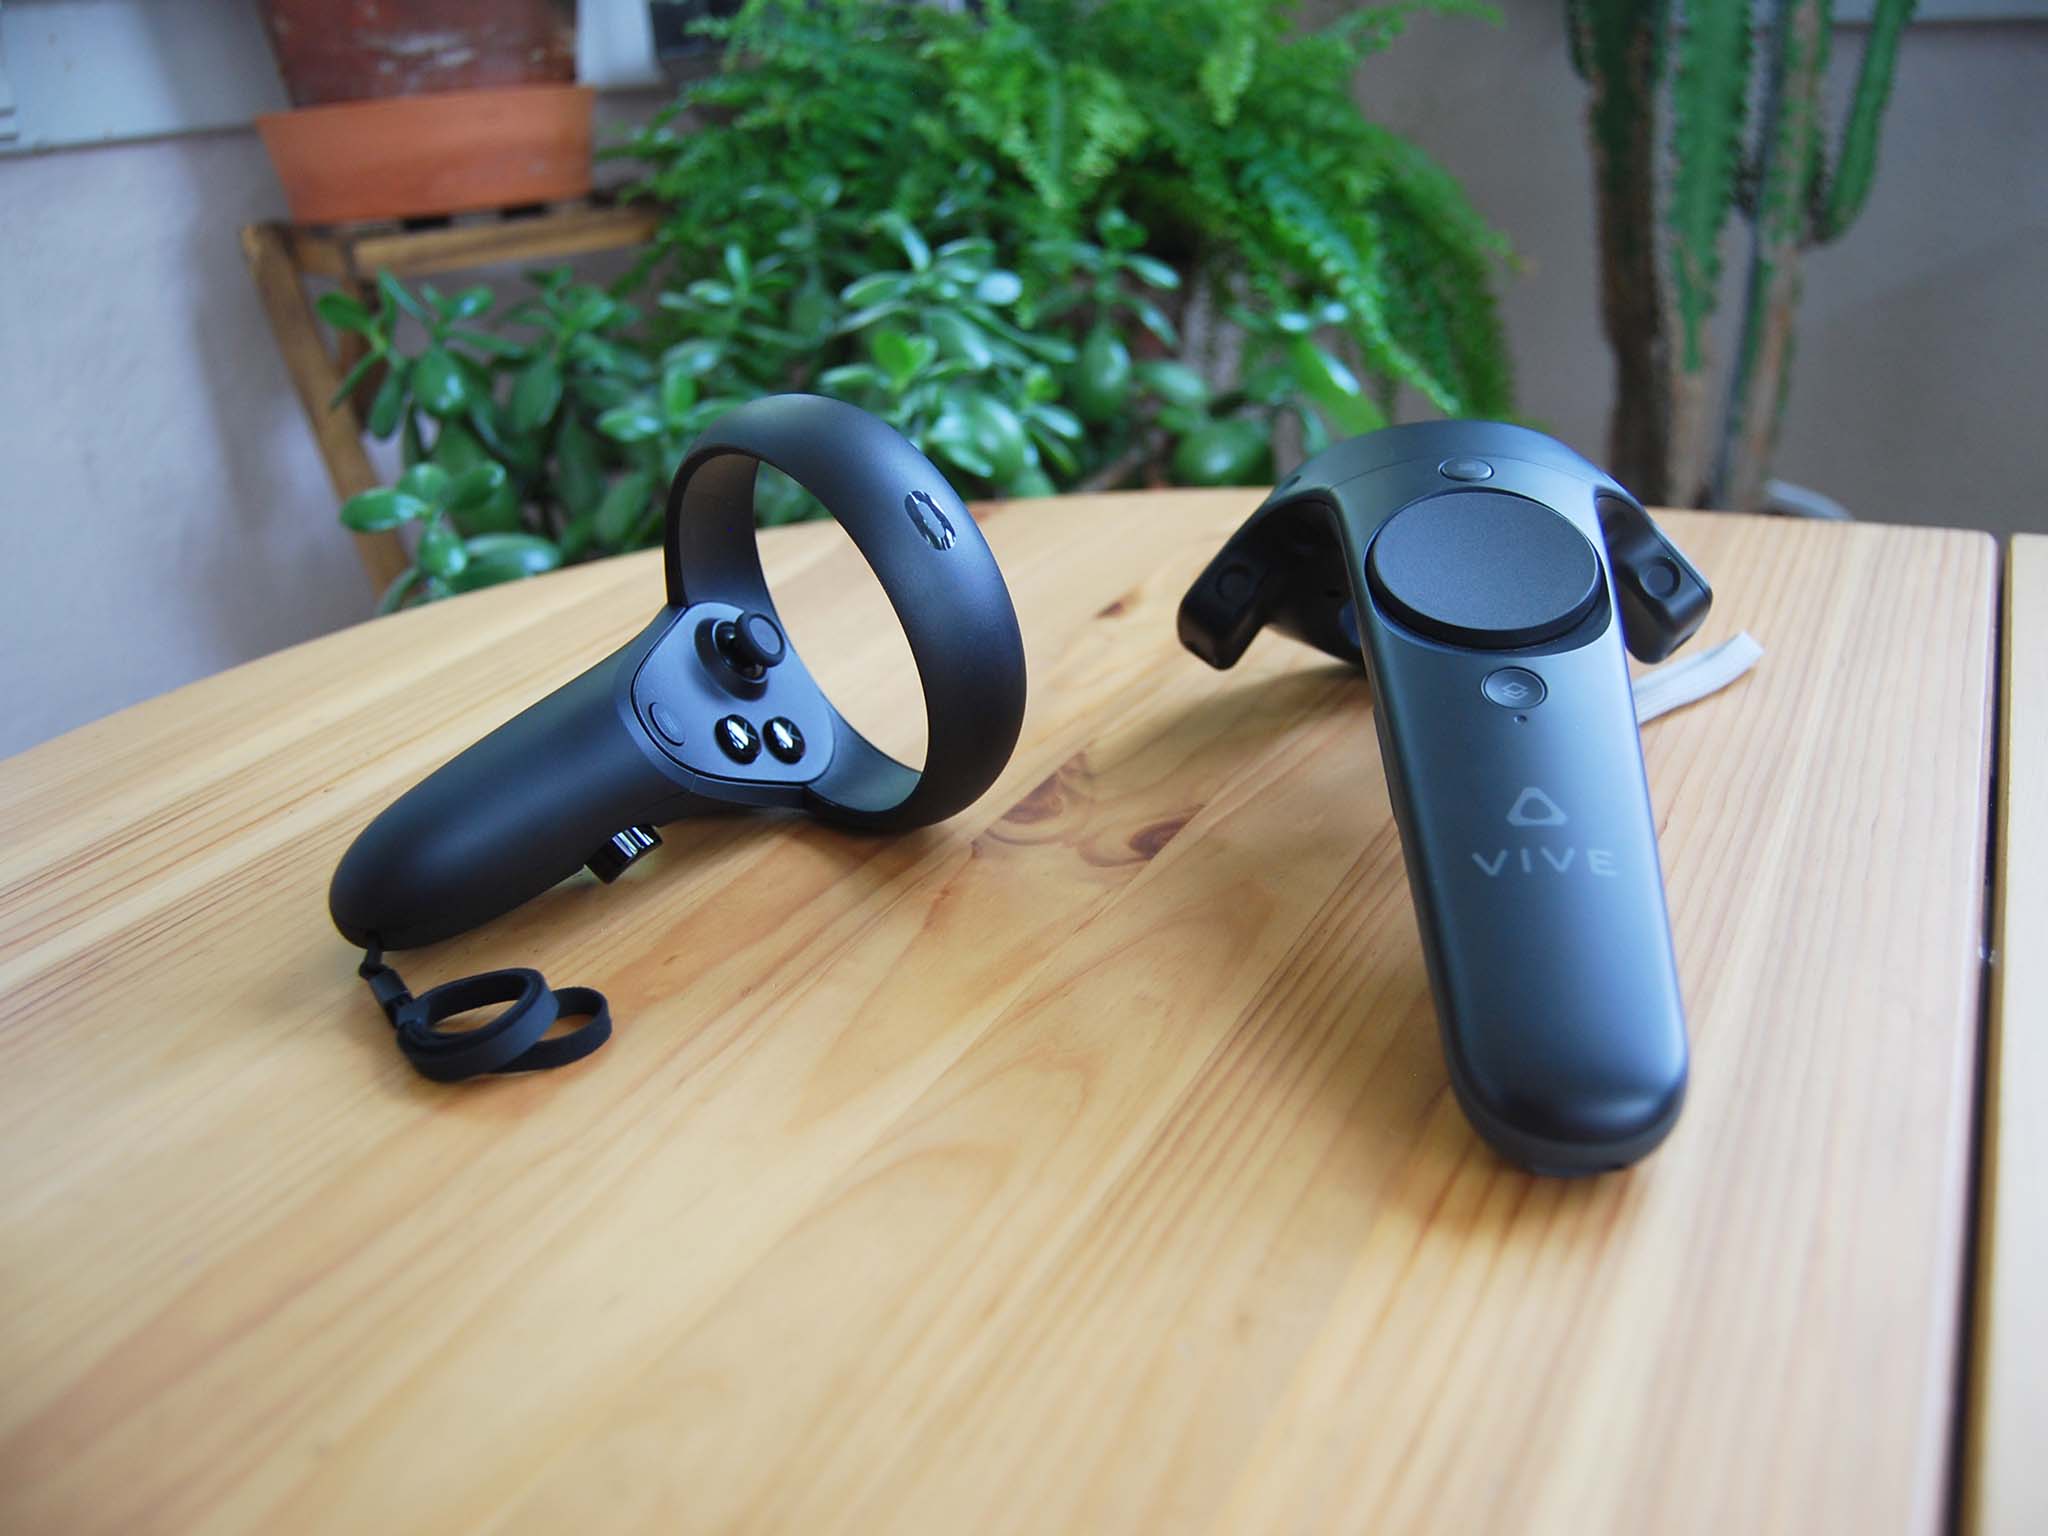 Rift S and Vive motion controllers